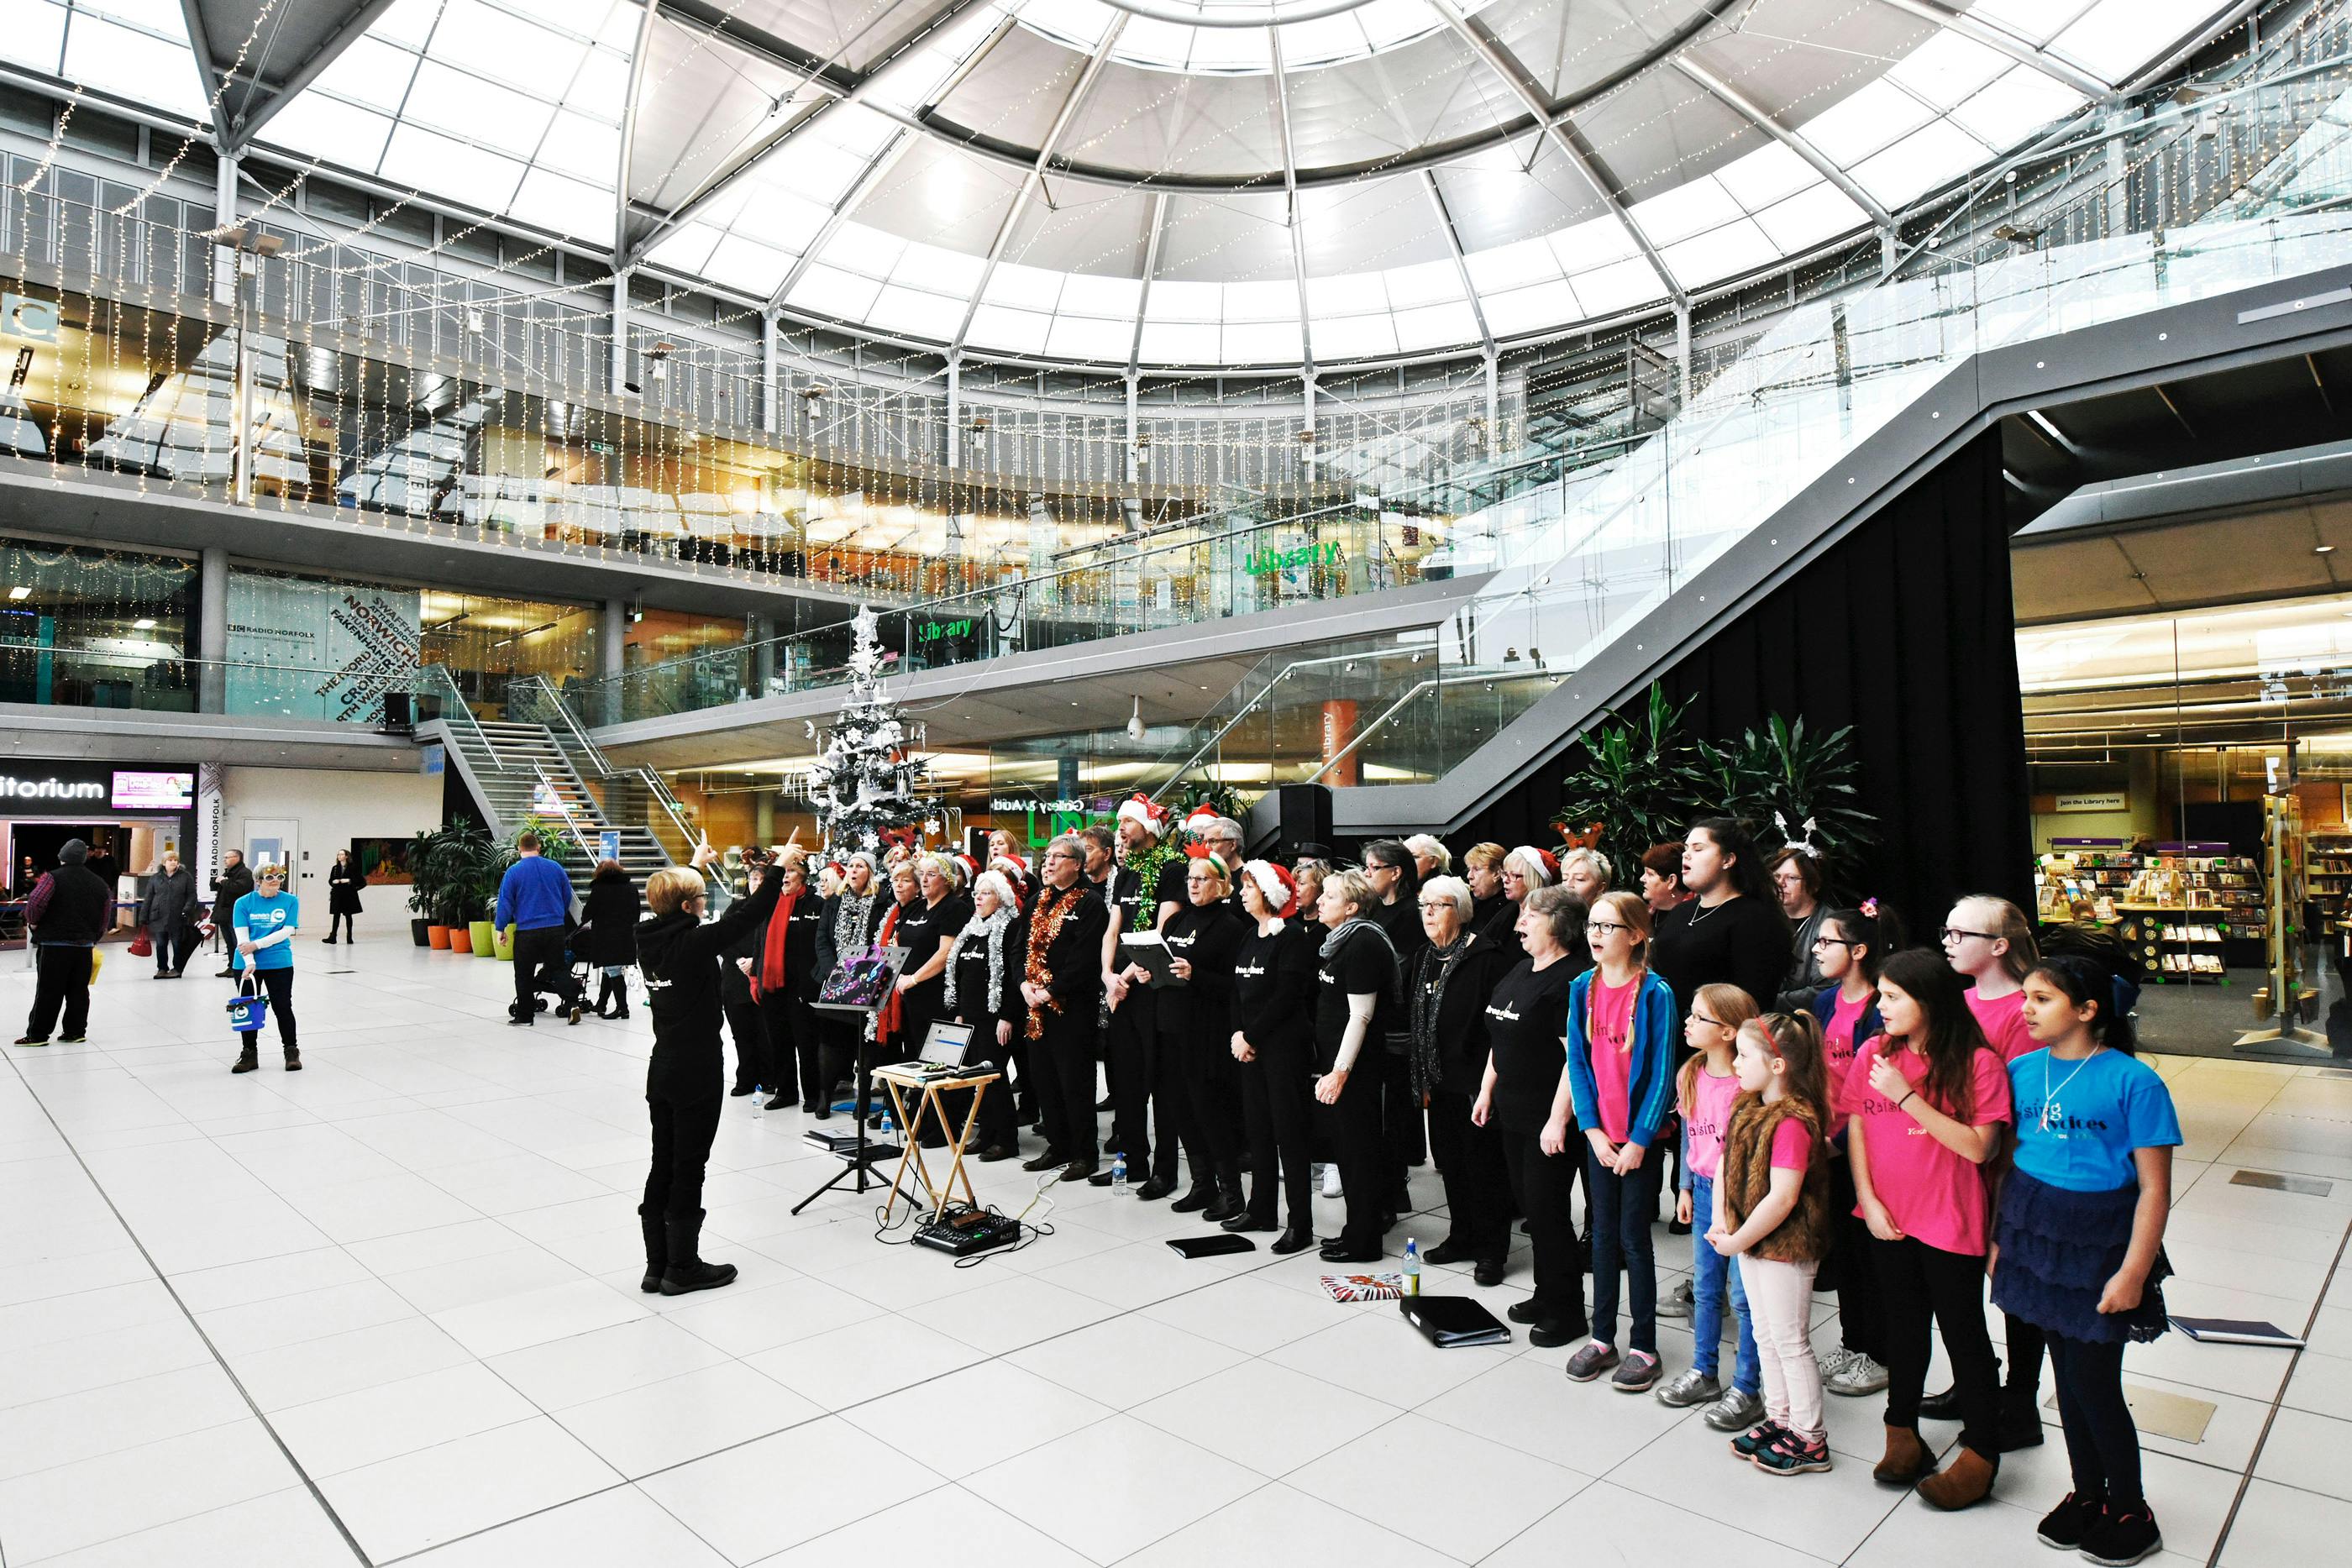 A conductor and choir sing in the Atrium of The Forum dressed in festive hats and tinsel